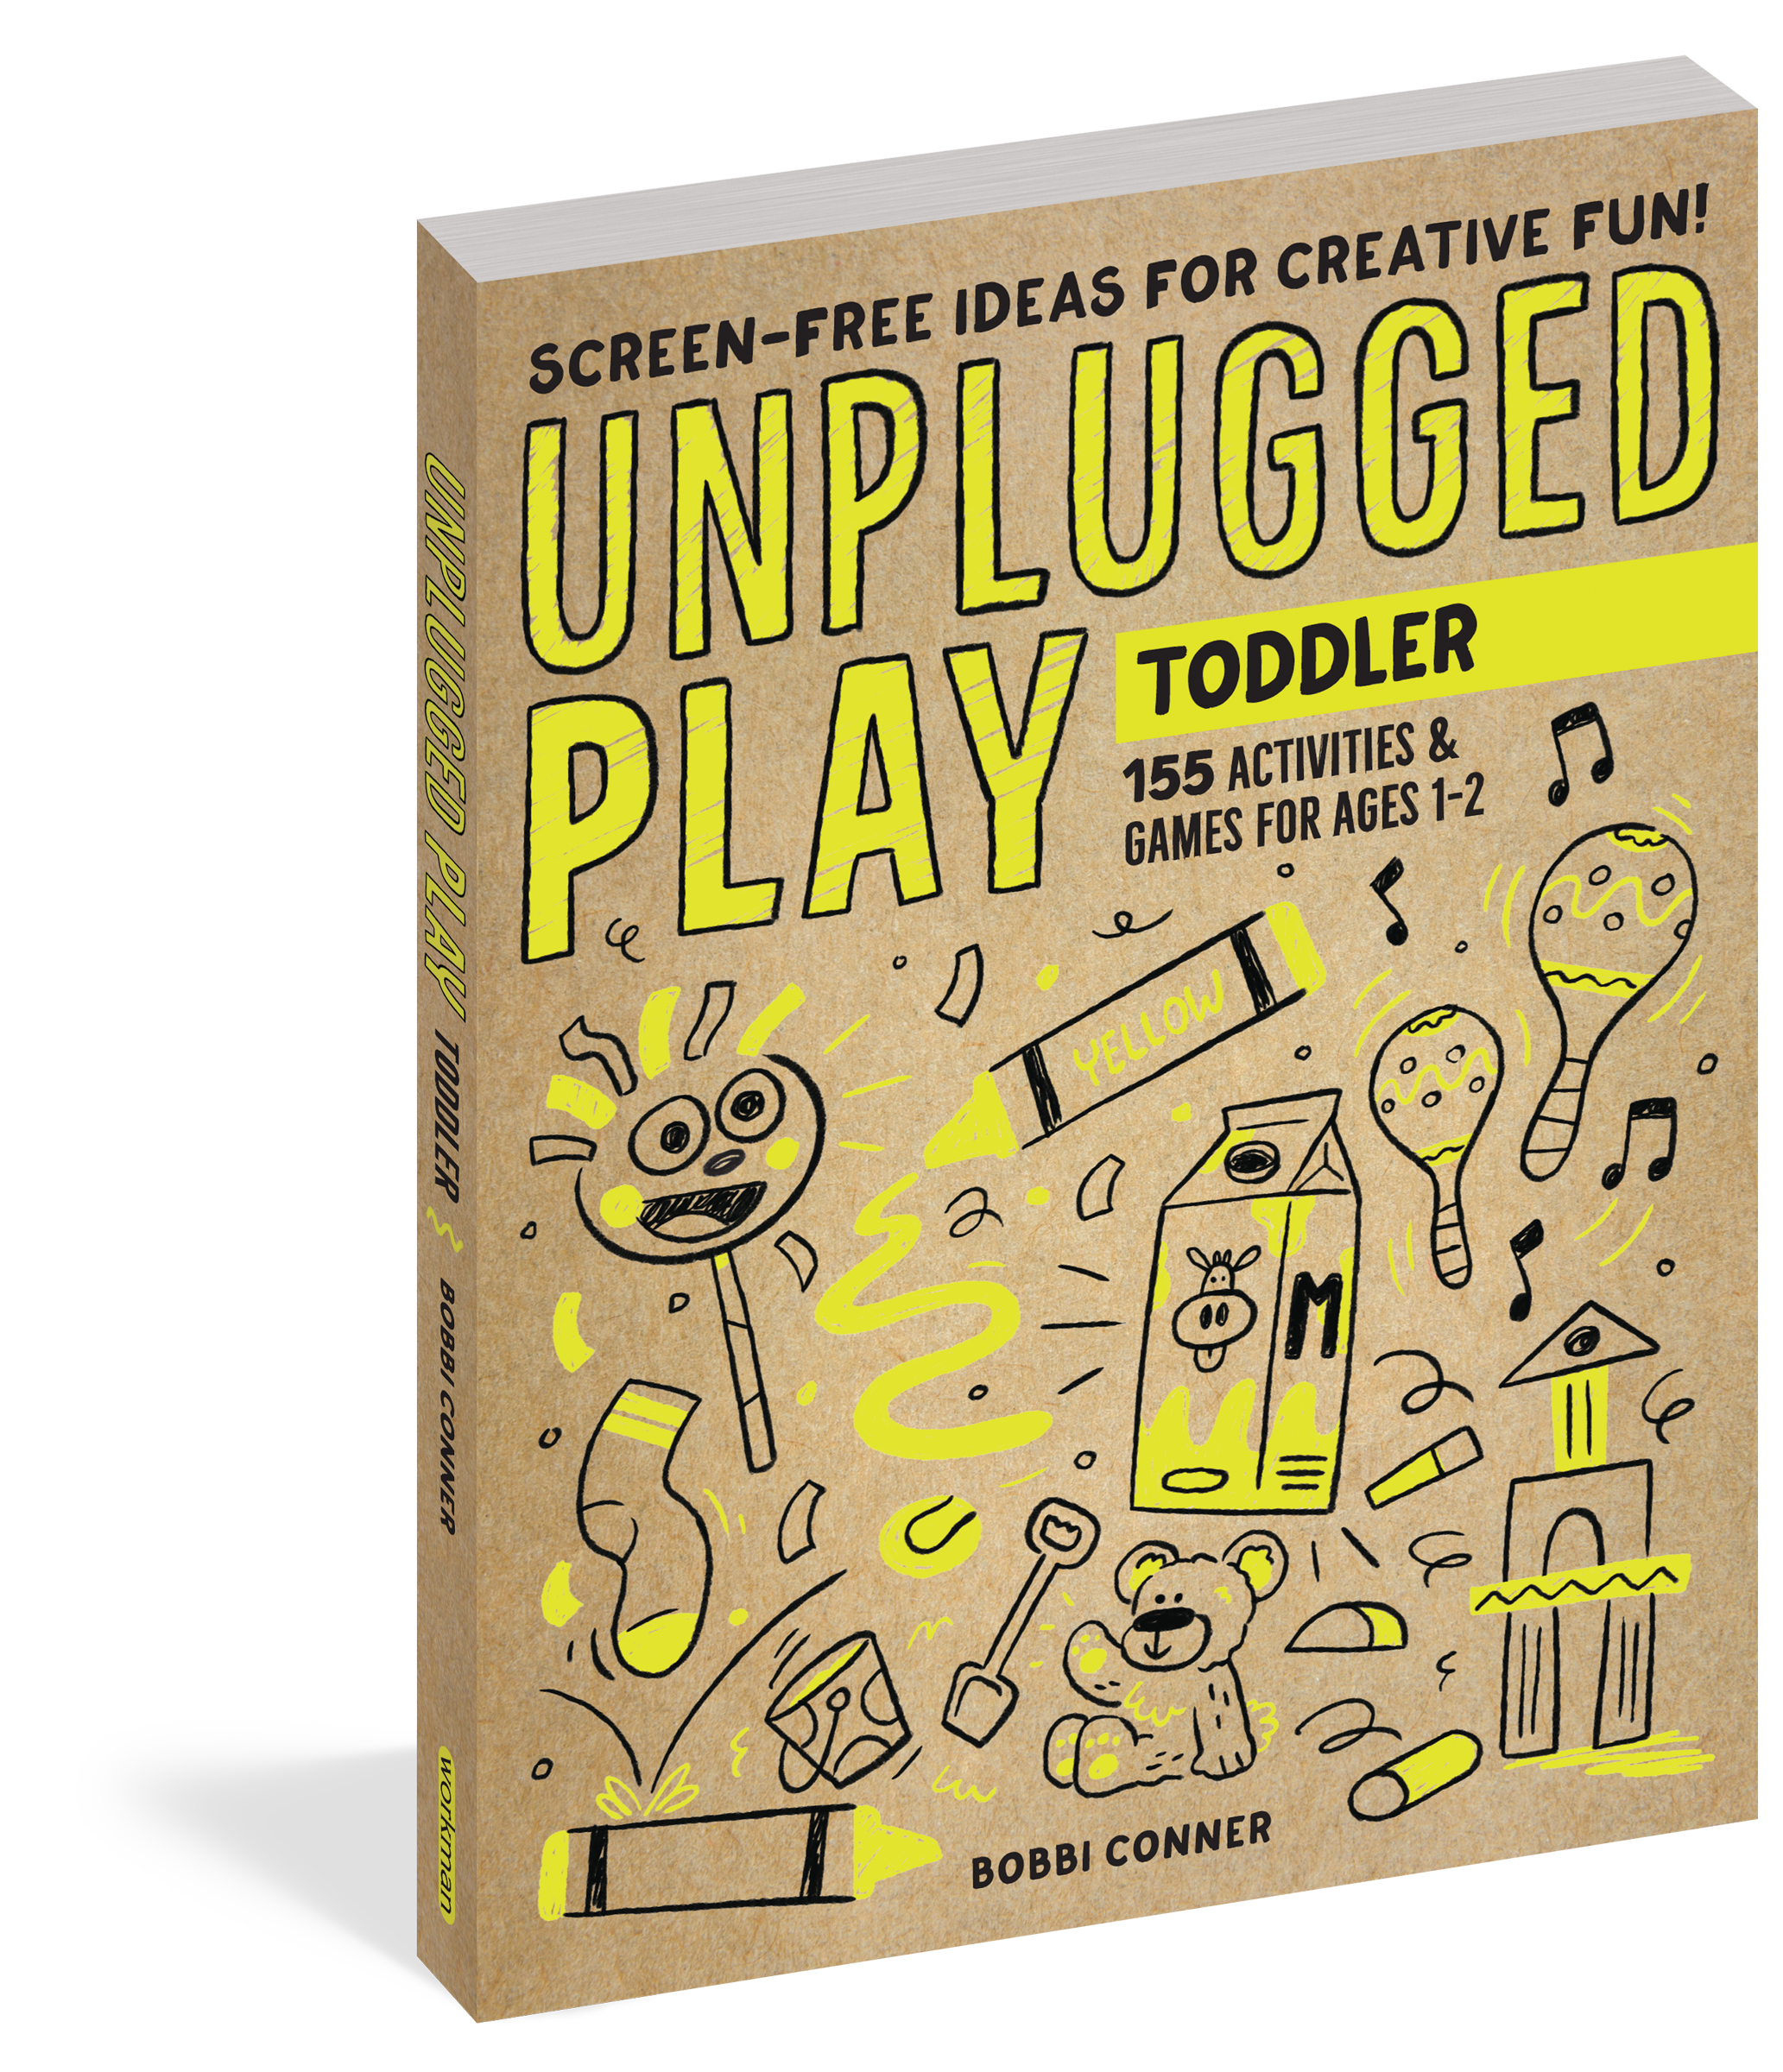 Unplugged Play - Toddler - Screen-Free Ideas for Creative Fun    